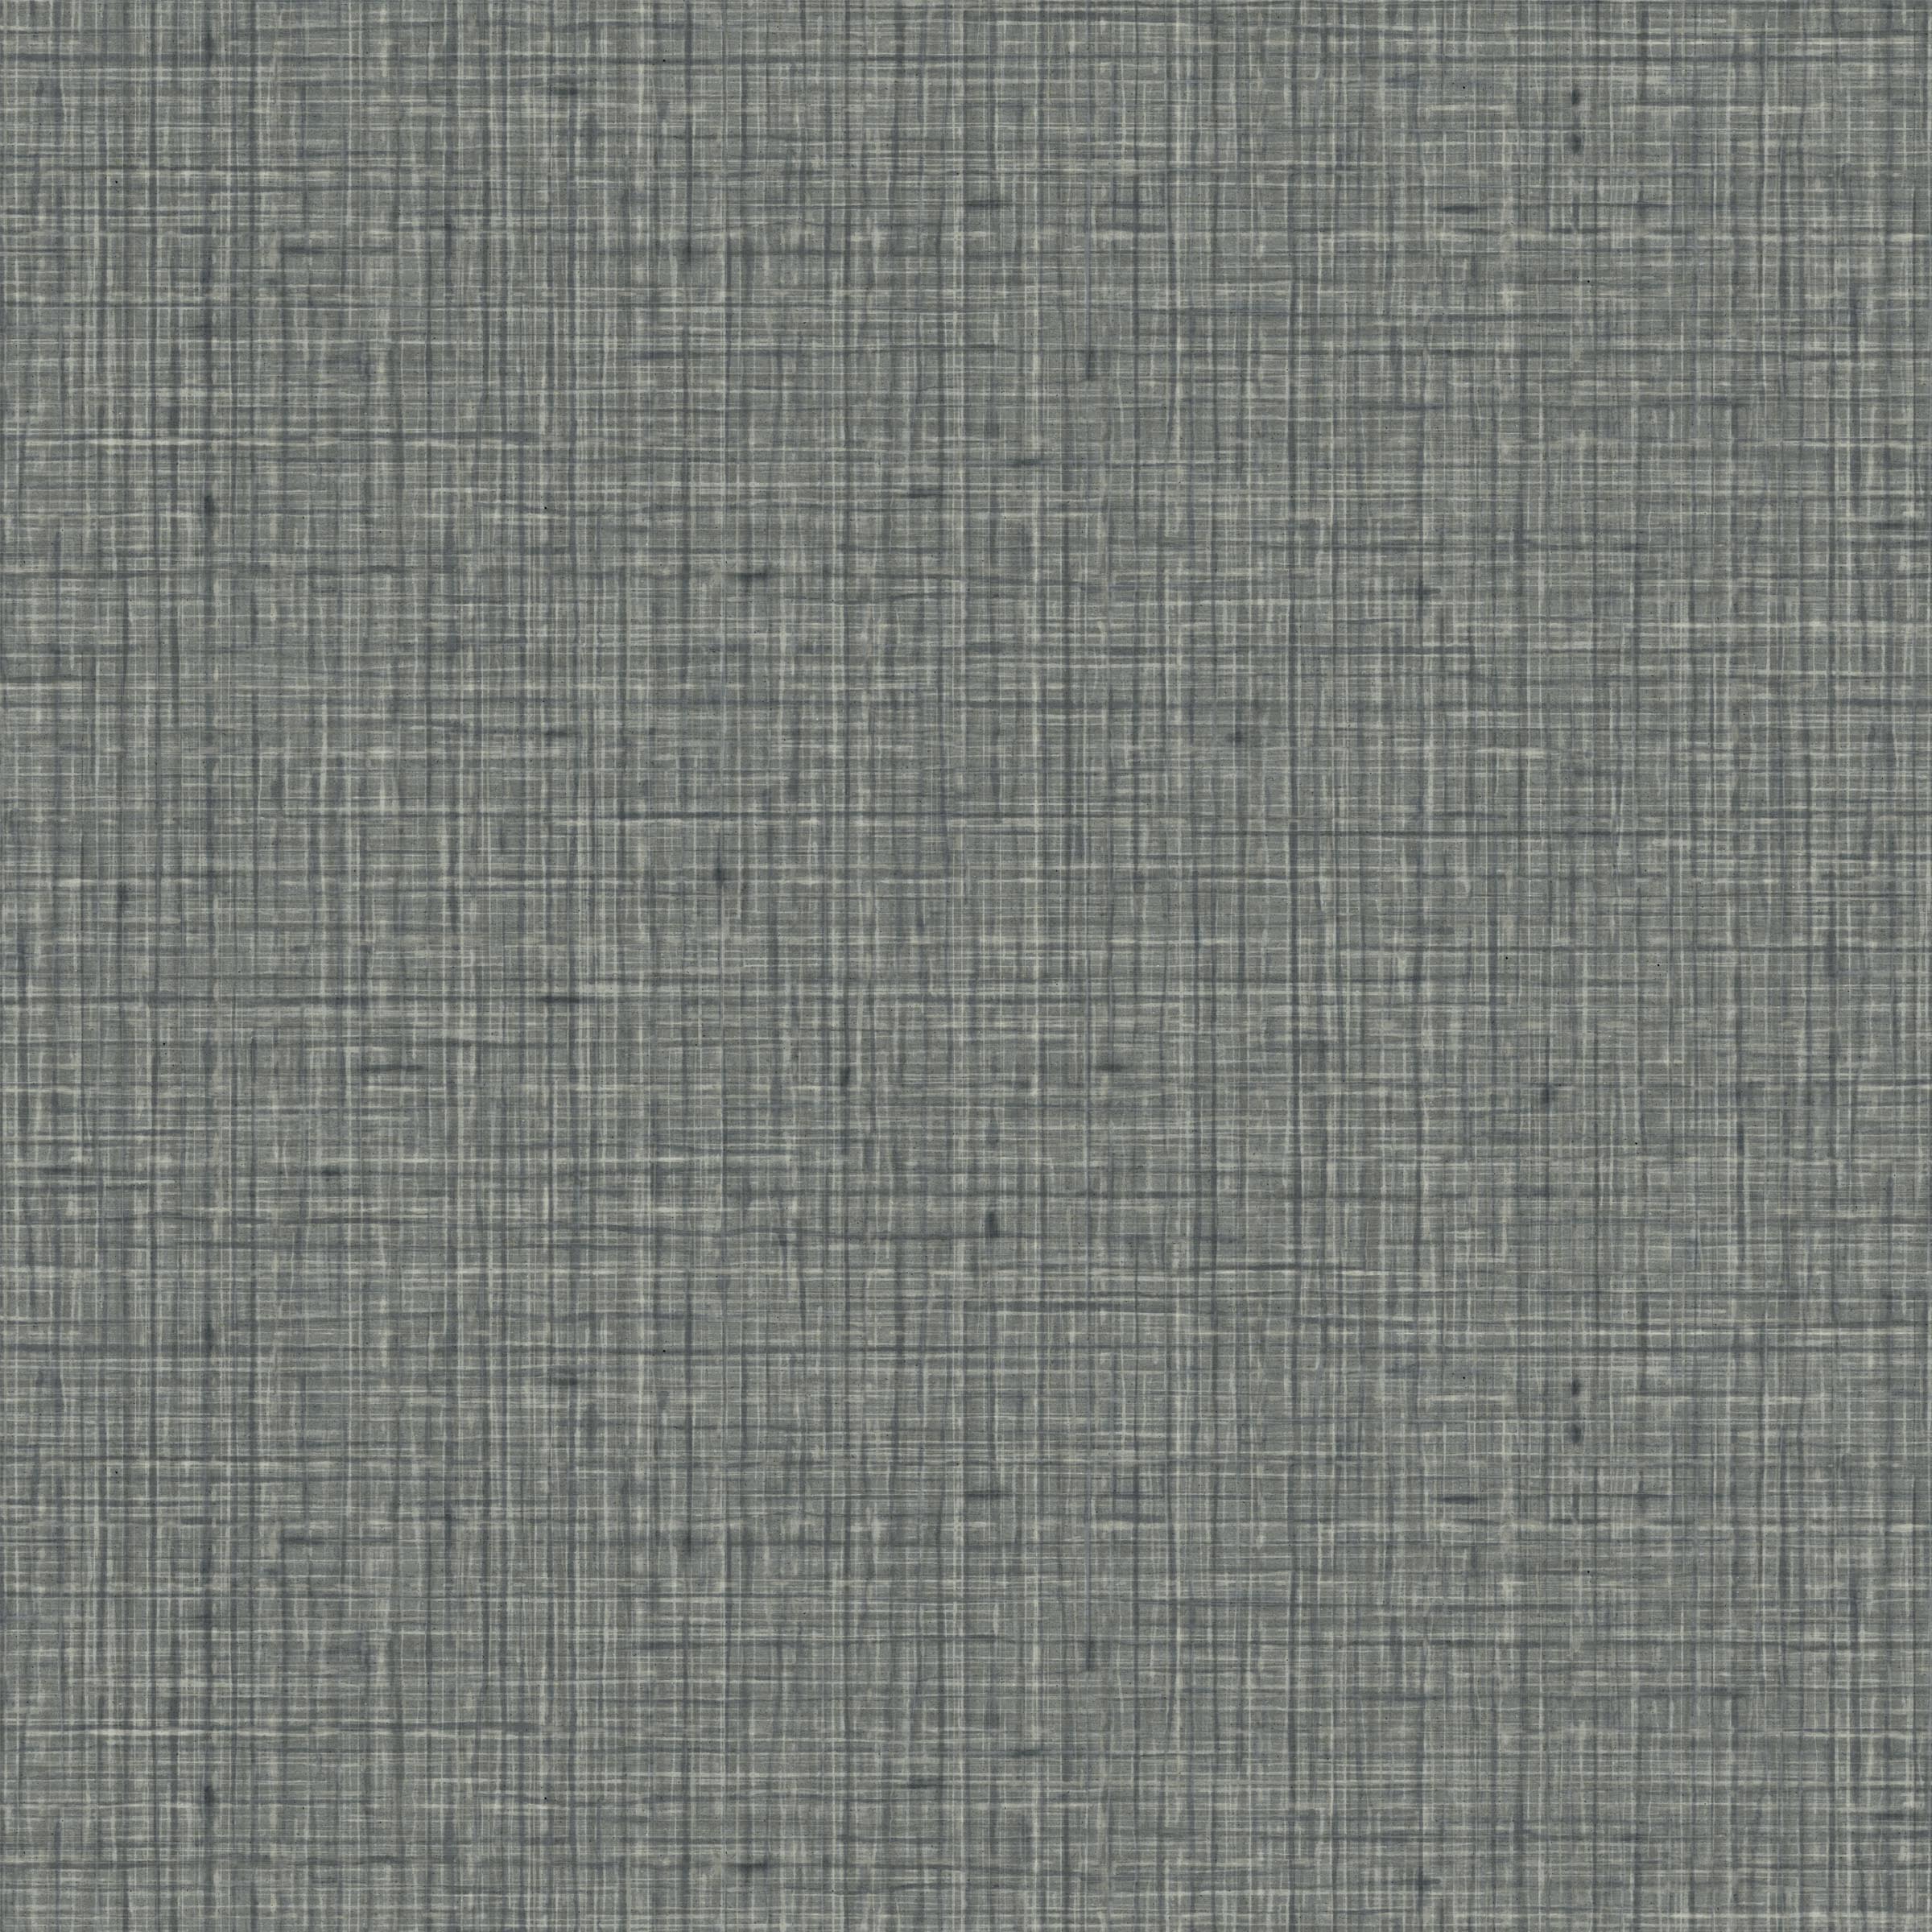 Detail of wallpaper in a textured tweed pattern in shades of gray-green.